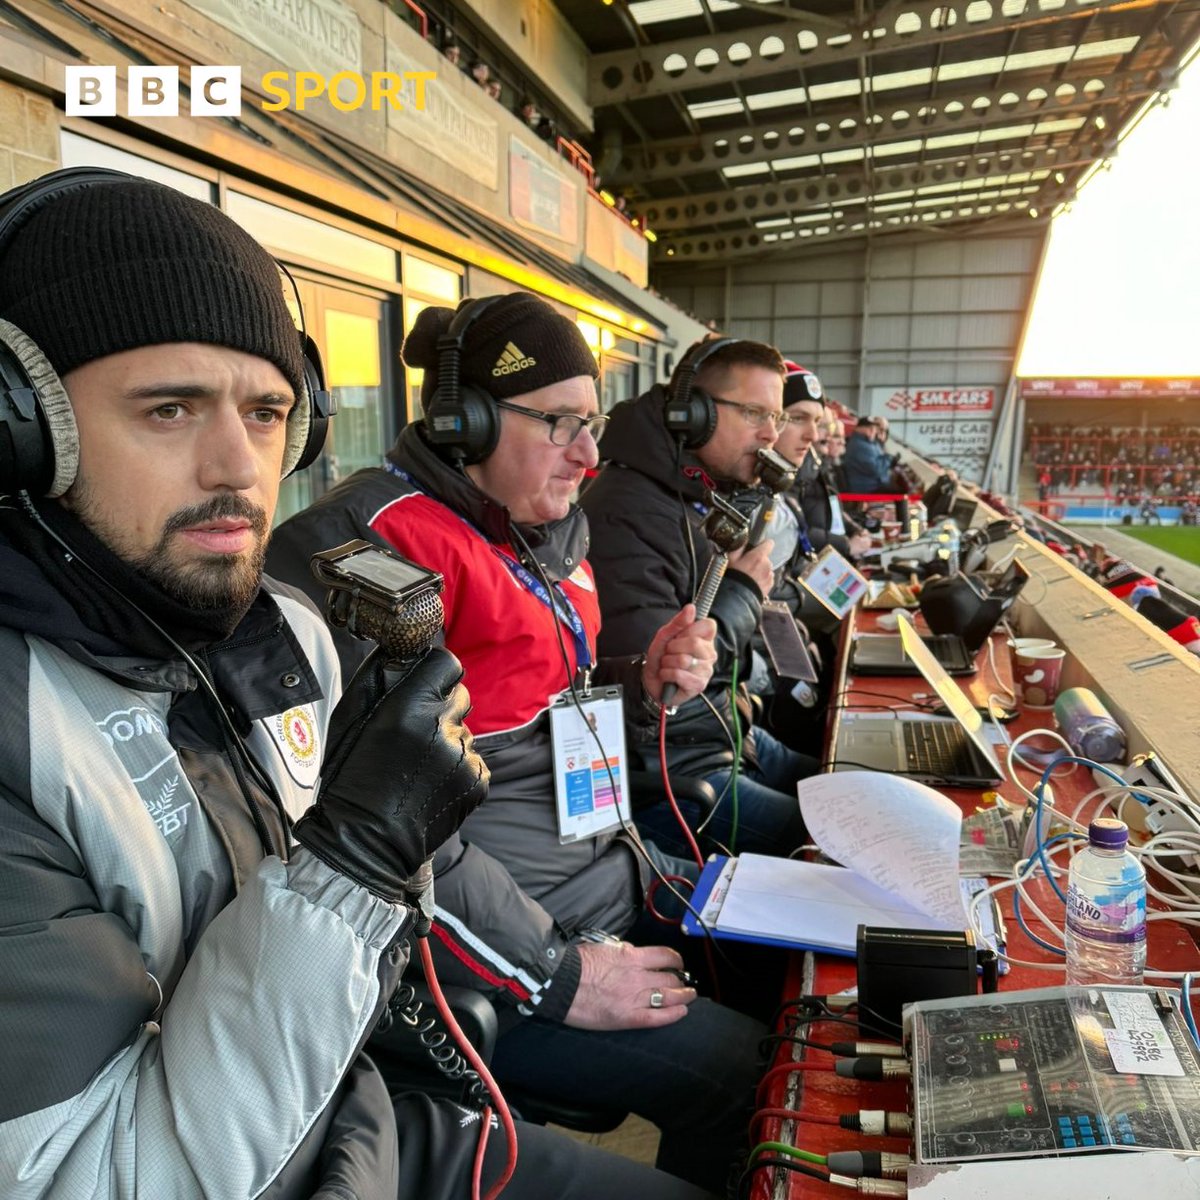 🔴 𝐒𝐏𝐄𝐂𝐈𝐀𝐋 𝐆𝐔𝐄𝐒𝐓 🔴 🚂 Crewe Alexandra midfielder Jack Powell joins @GMcGarrySport & @ThePeterMorse in the commentary box for this evening's game at Morecambe! 📻 Full commentary is live now on all frequencies! #BBCFootball | #CreweAlex